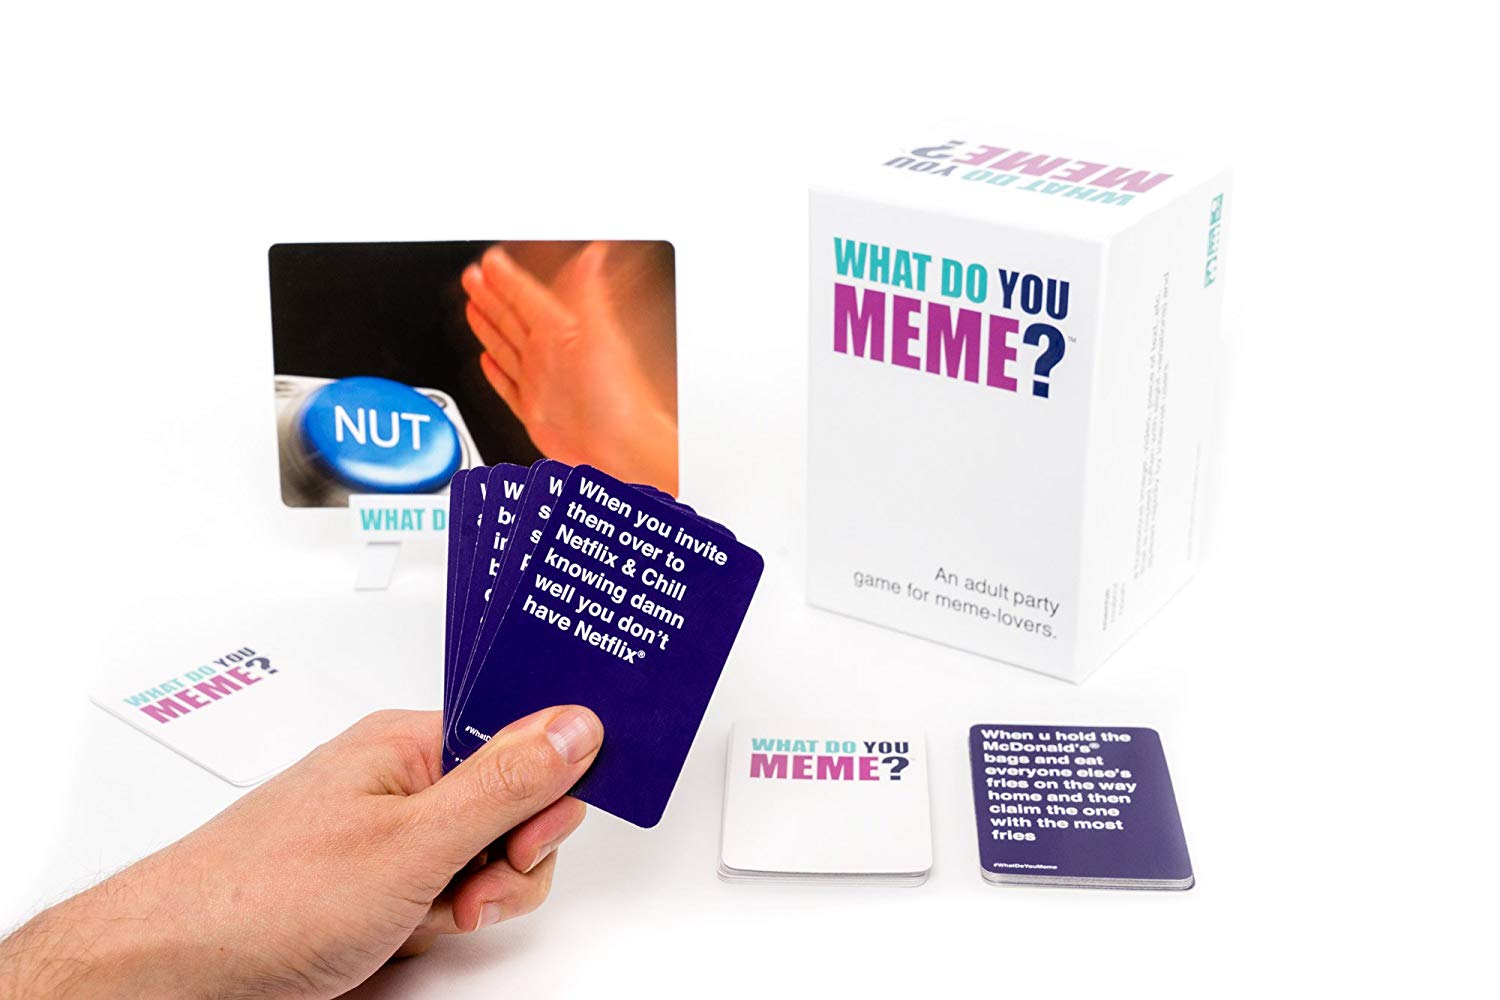 The What Do You Meme? game meme captions